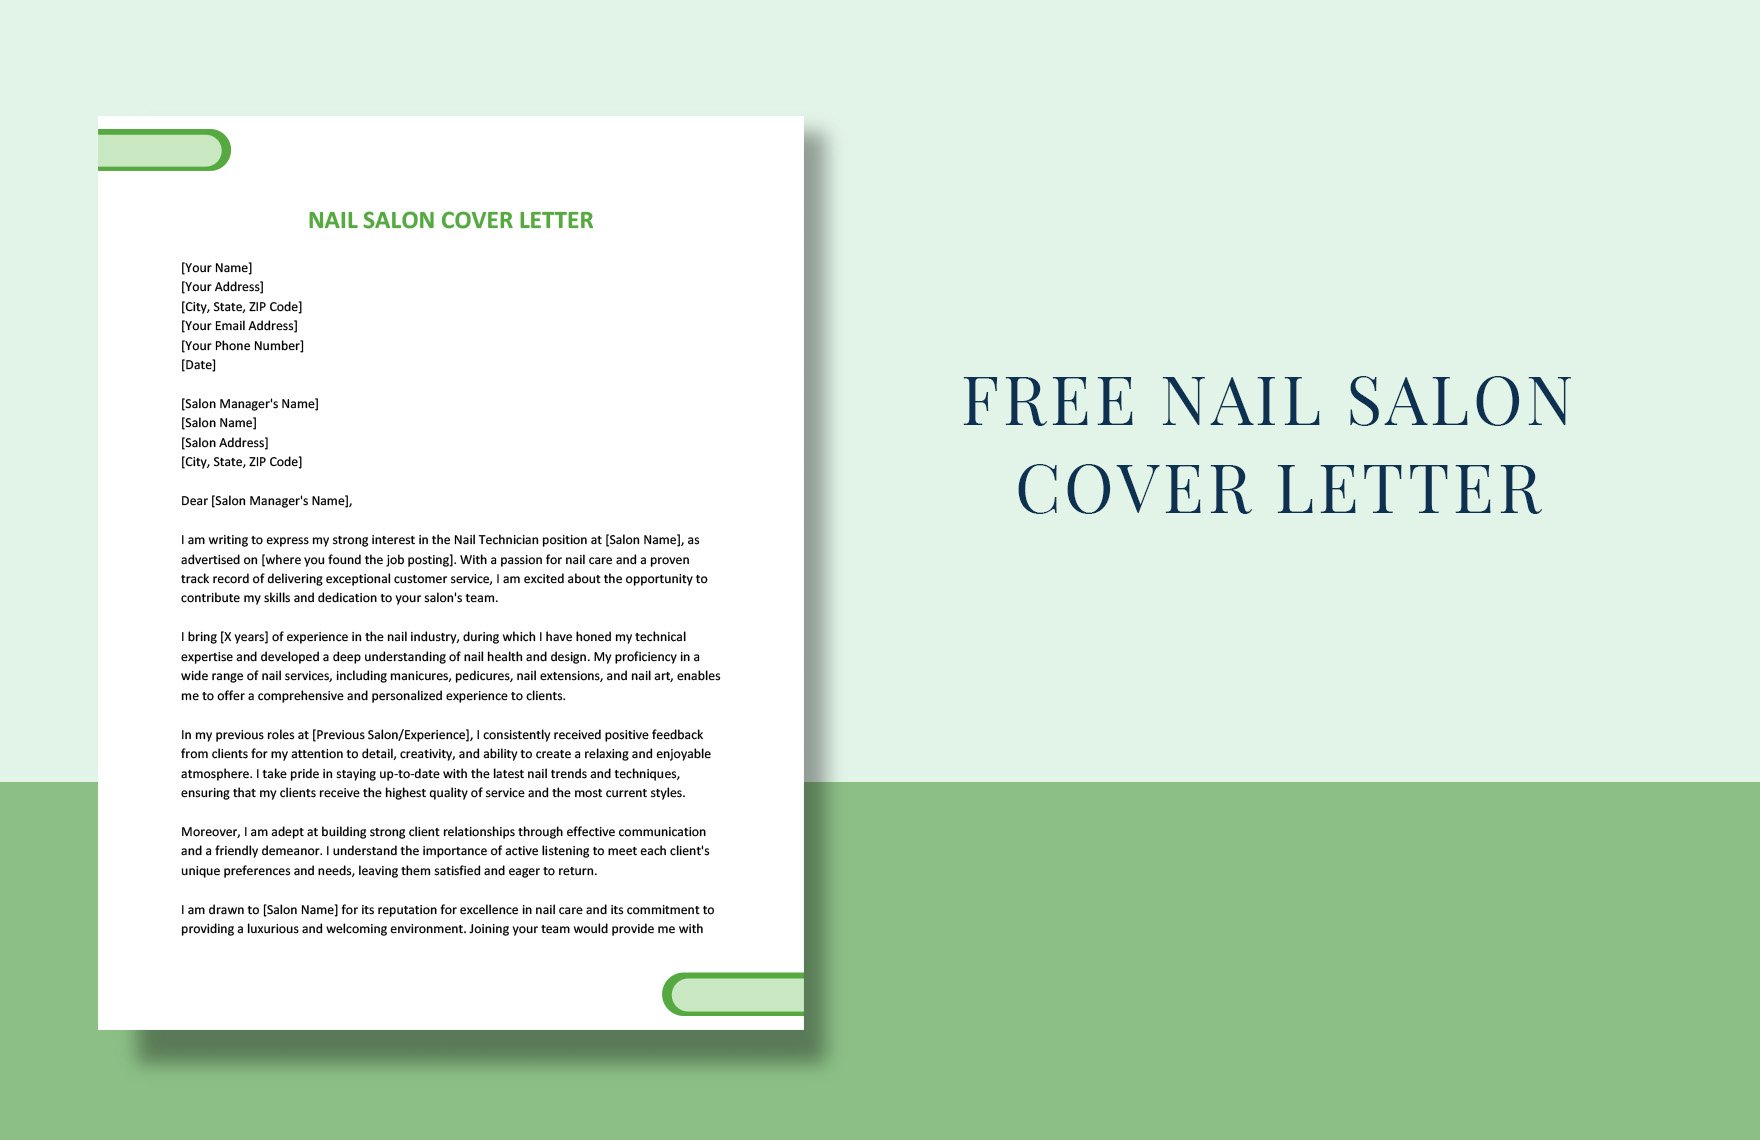 Nail Salon Cover Letter in Word, Google Docs